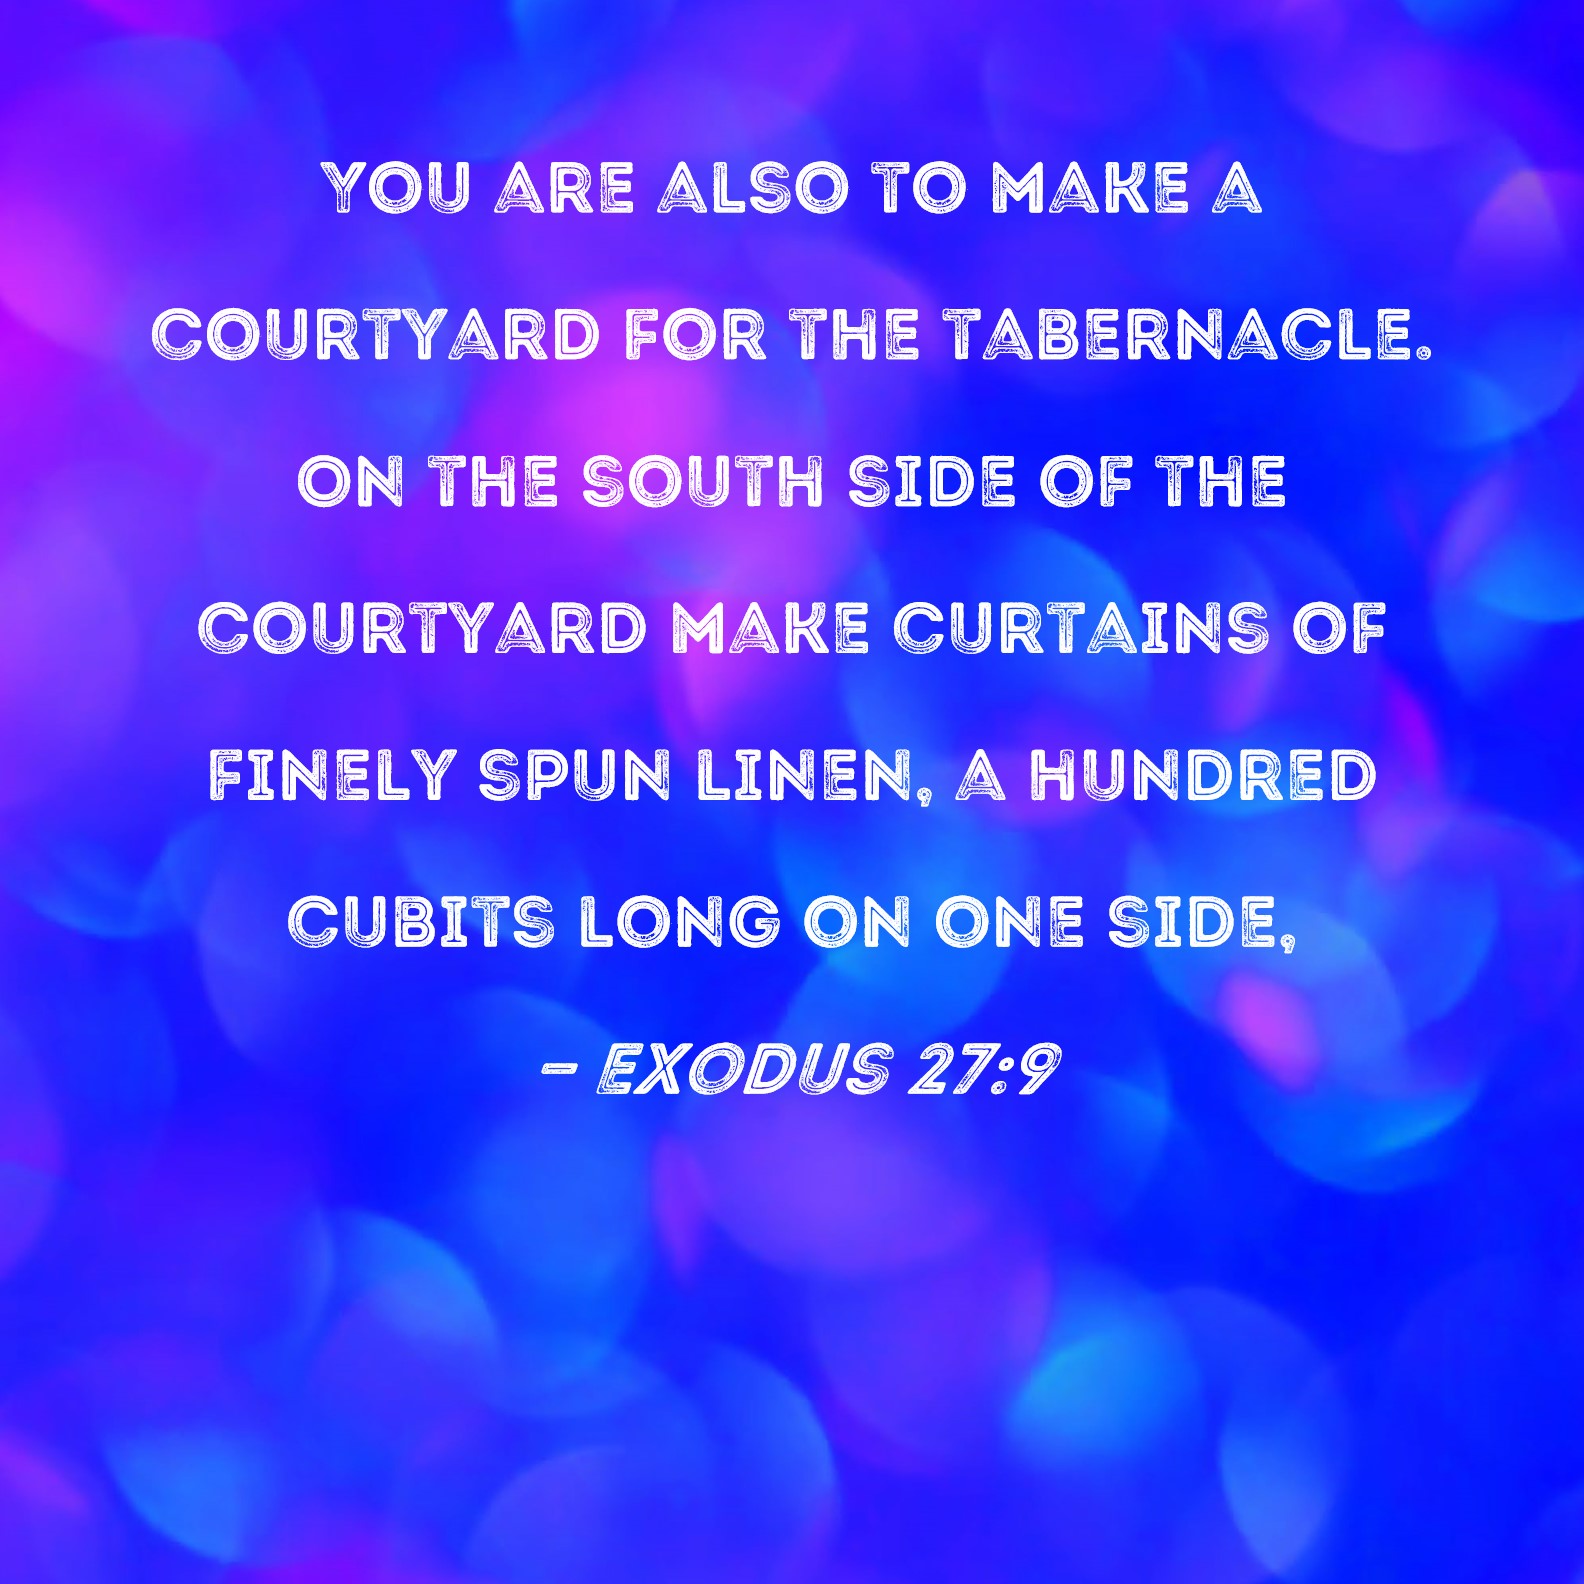 Exodus You Are Also To Make A Courtyard For The Tabernacle On The South Side Of The